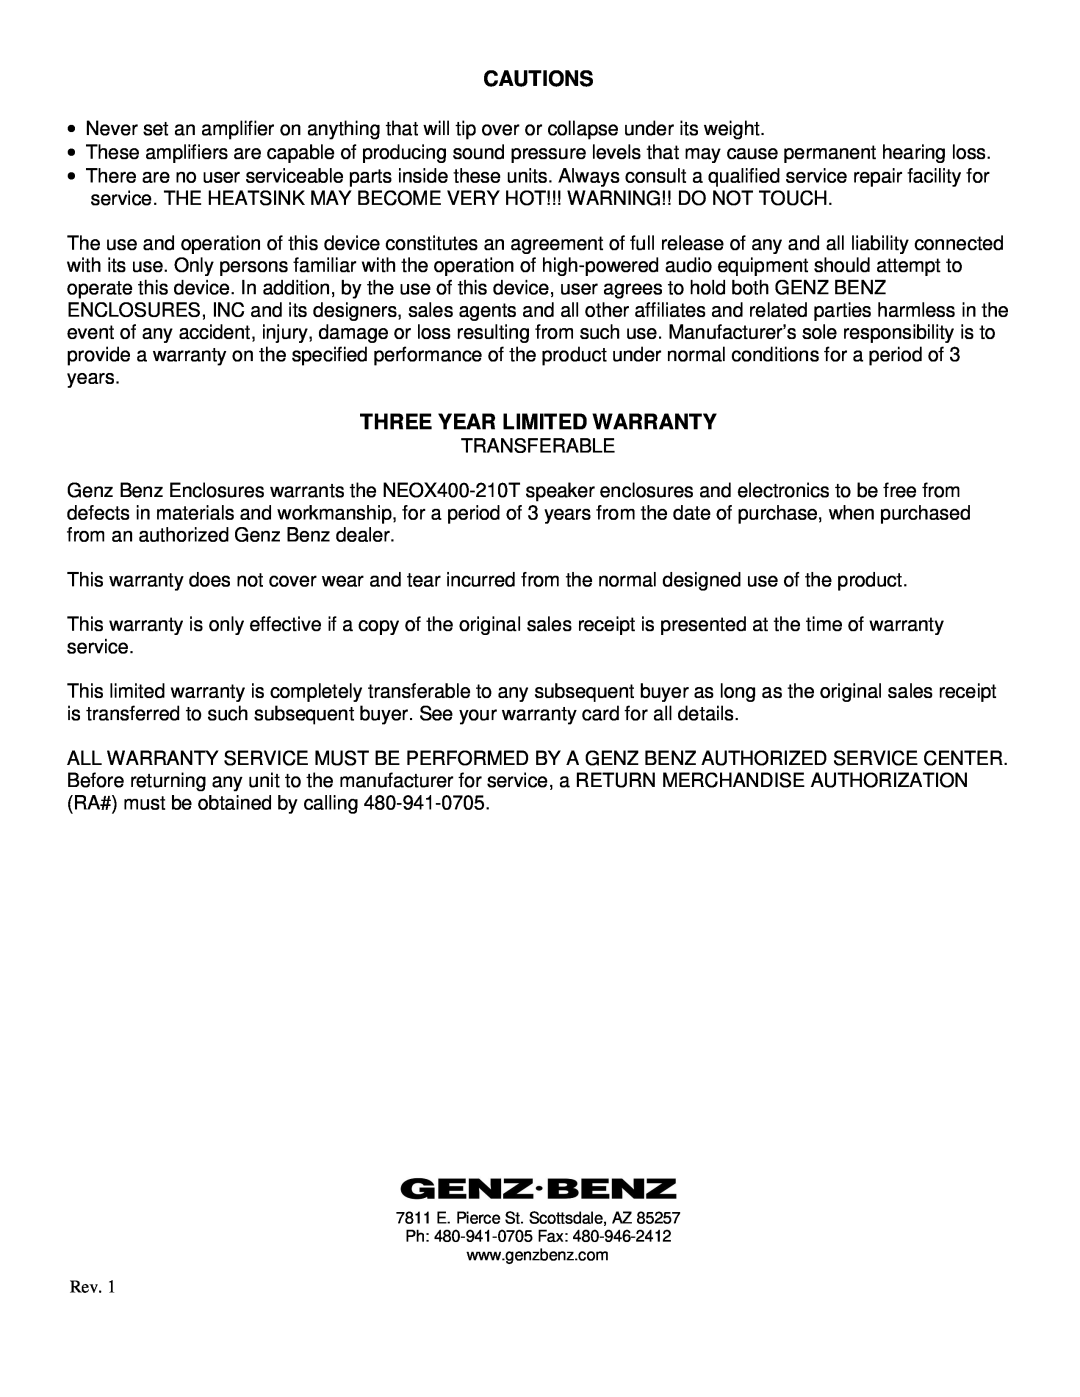 Genz-Benz NEOX400-210T owner manual Cautions, Three Year Limited Warranty 